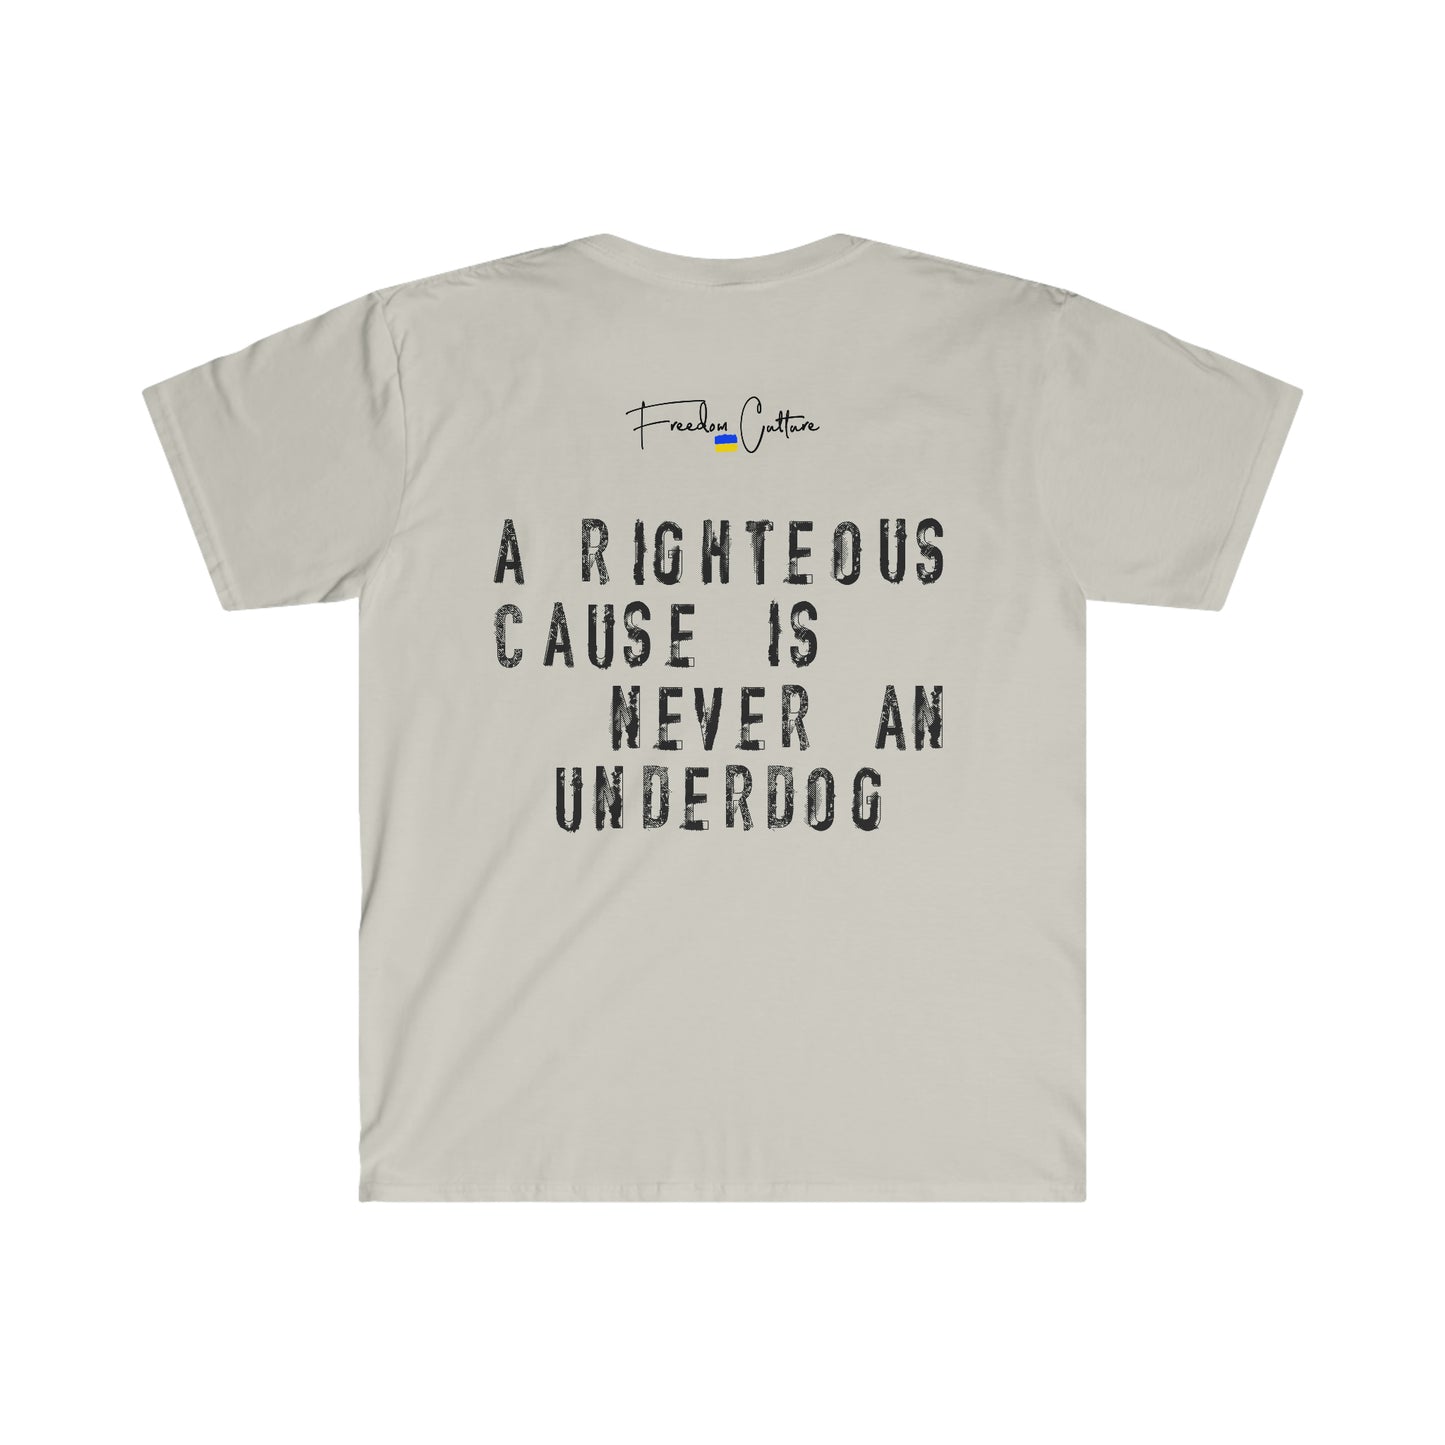 Righteous Cause T-shirt